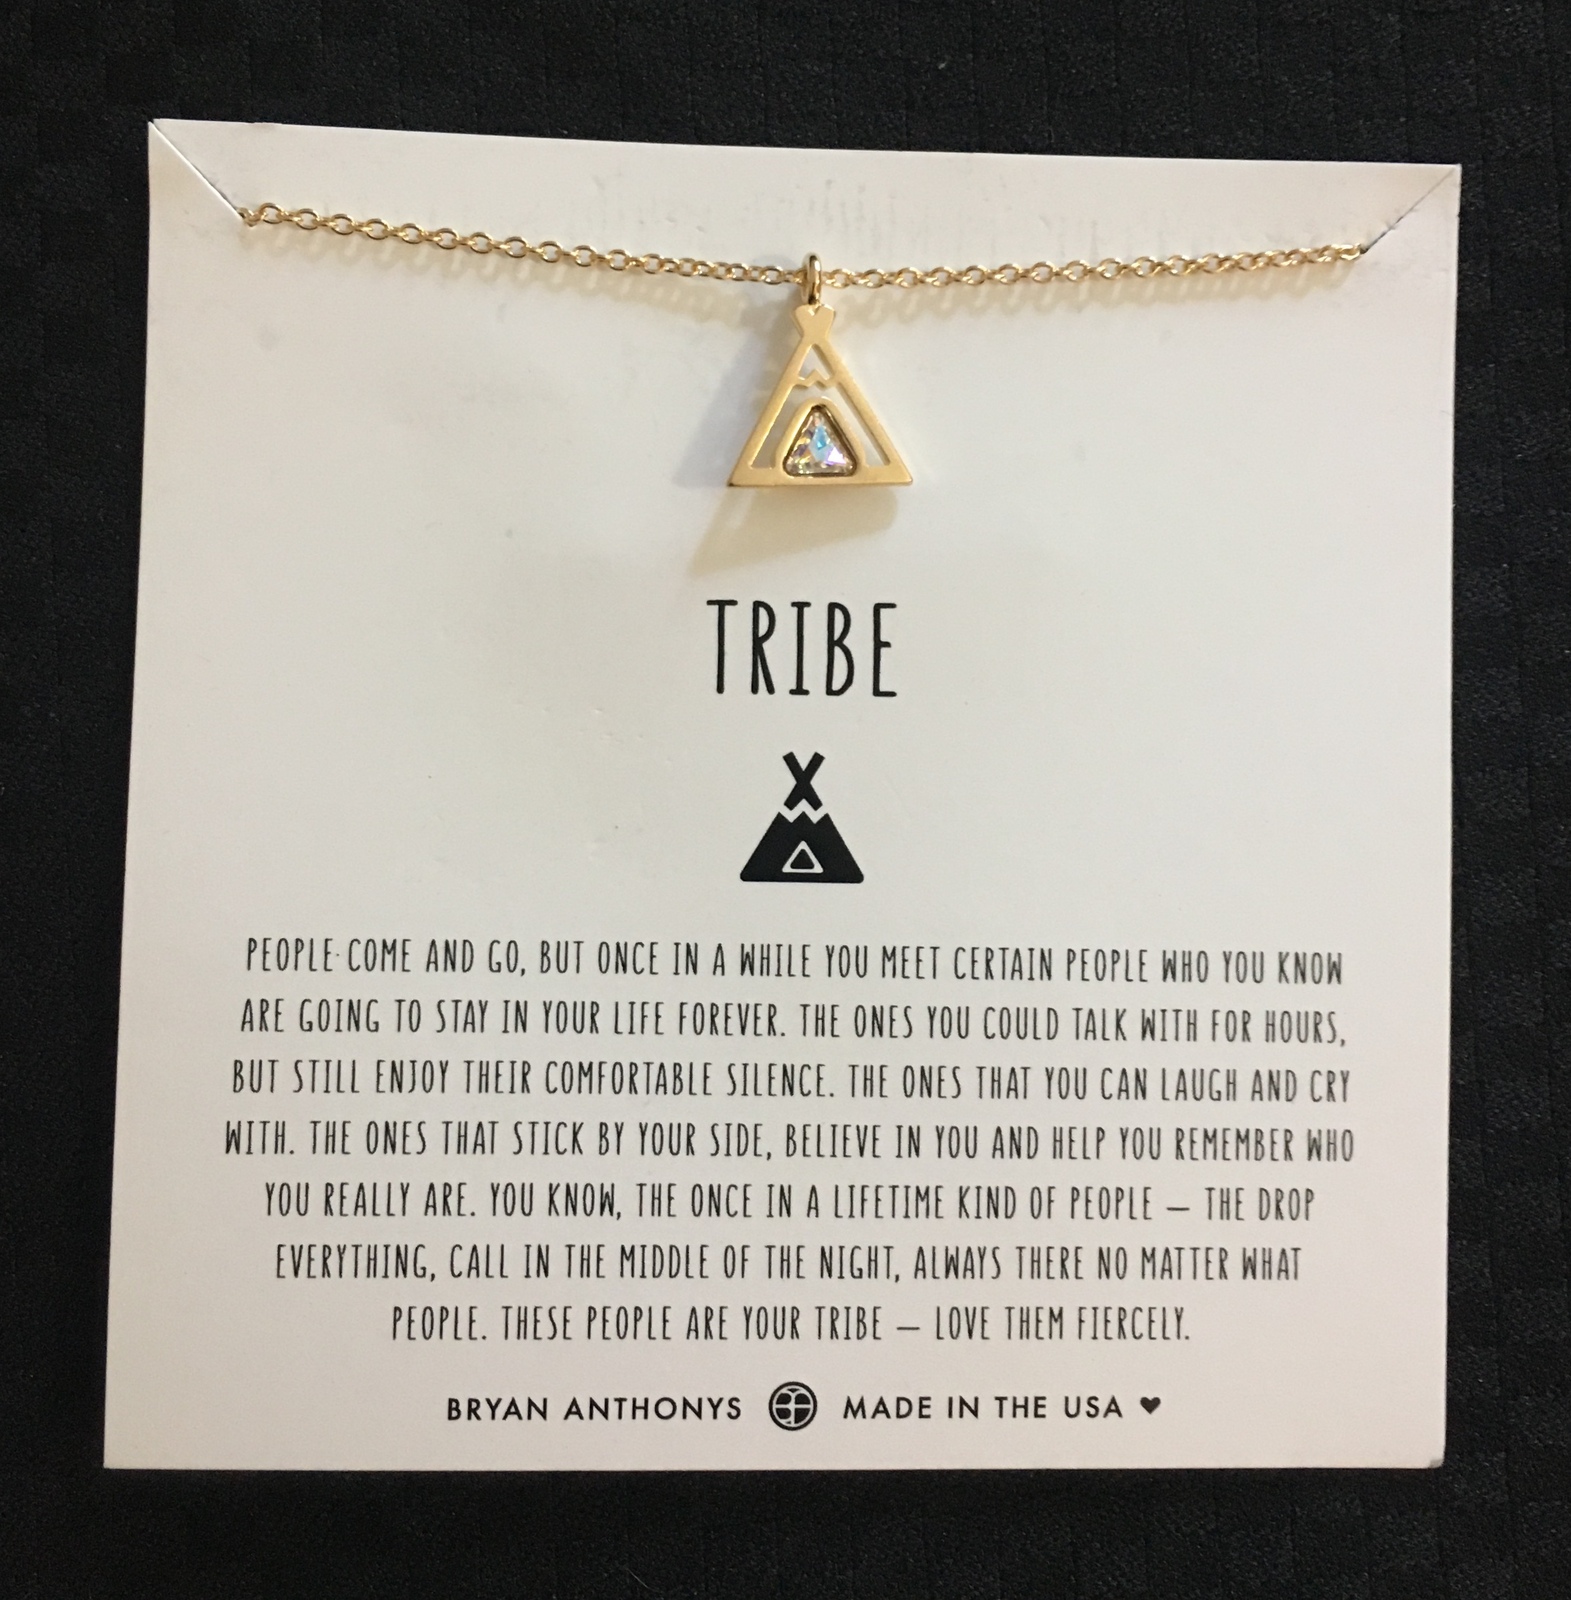 Bryan Anthonys Tribe Tepee Yellow Gold Friendship Necklace